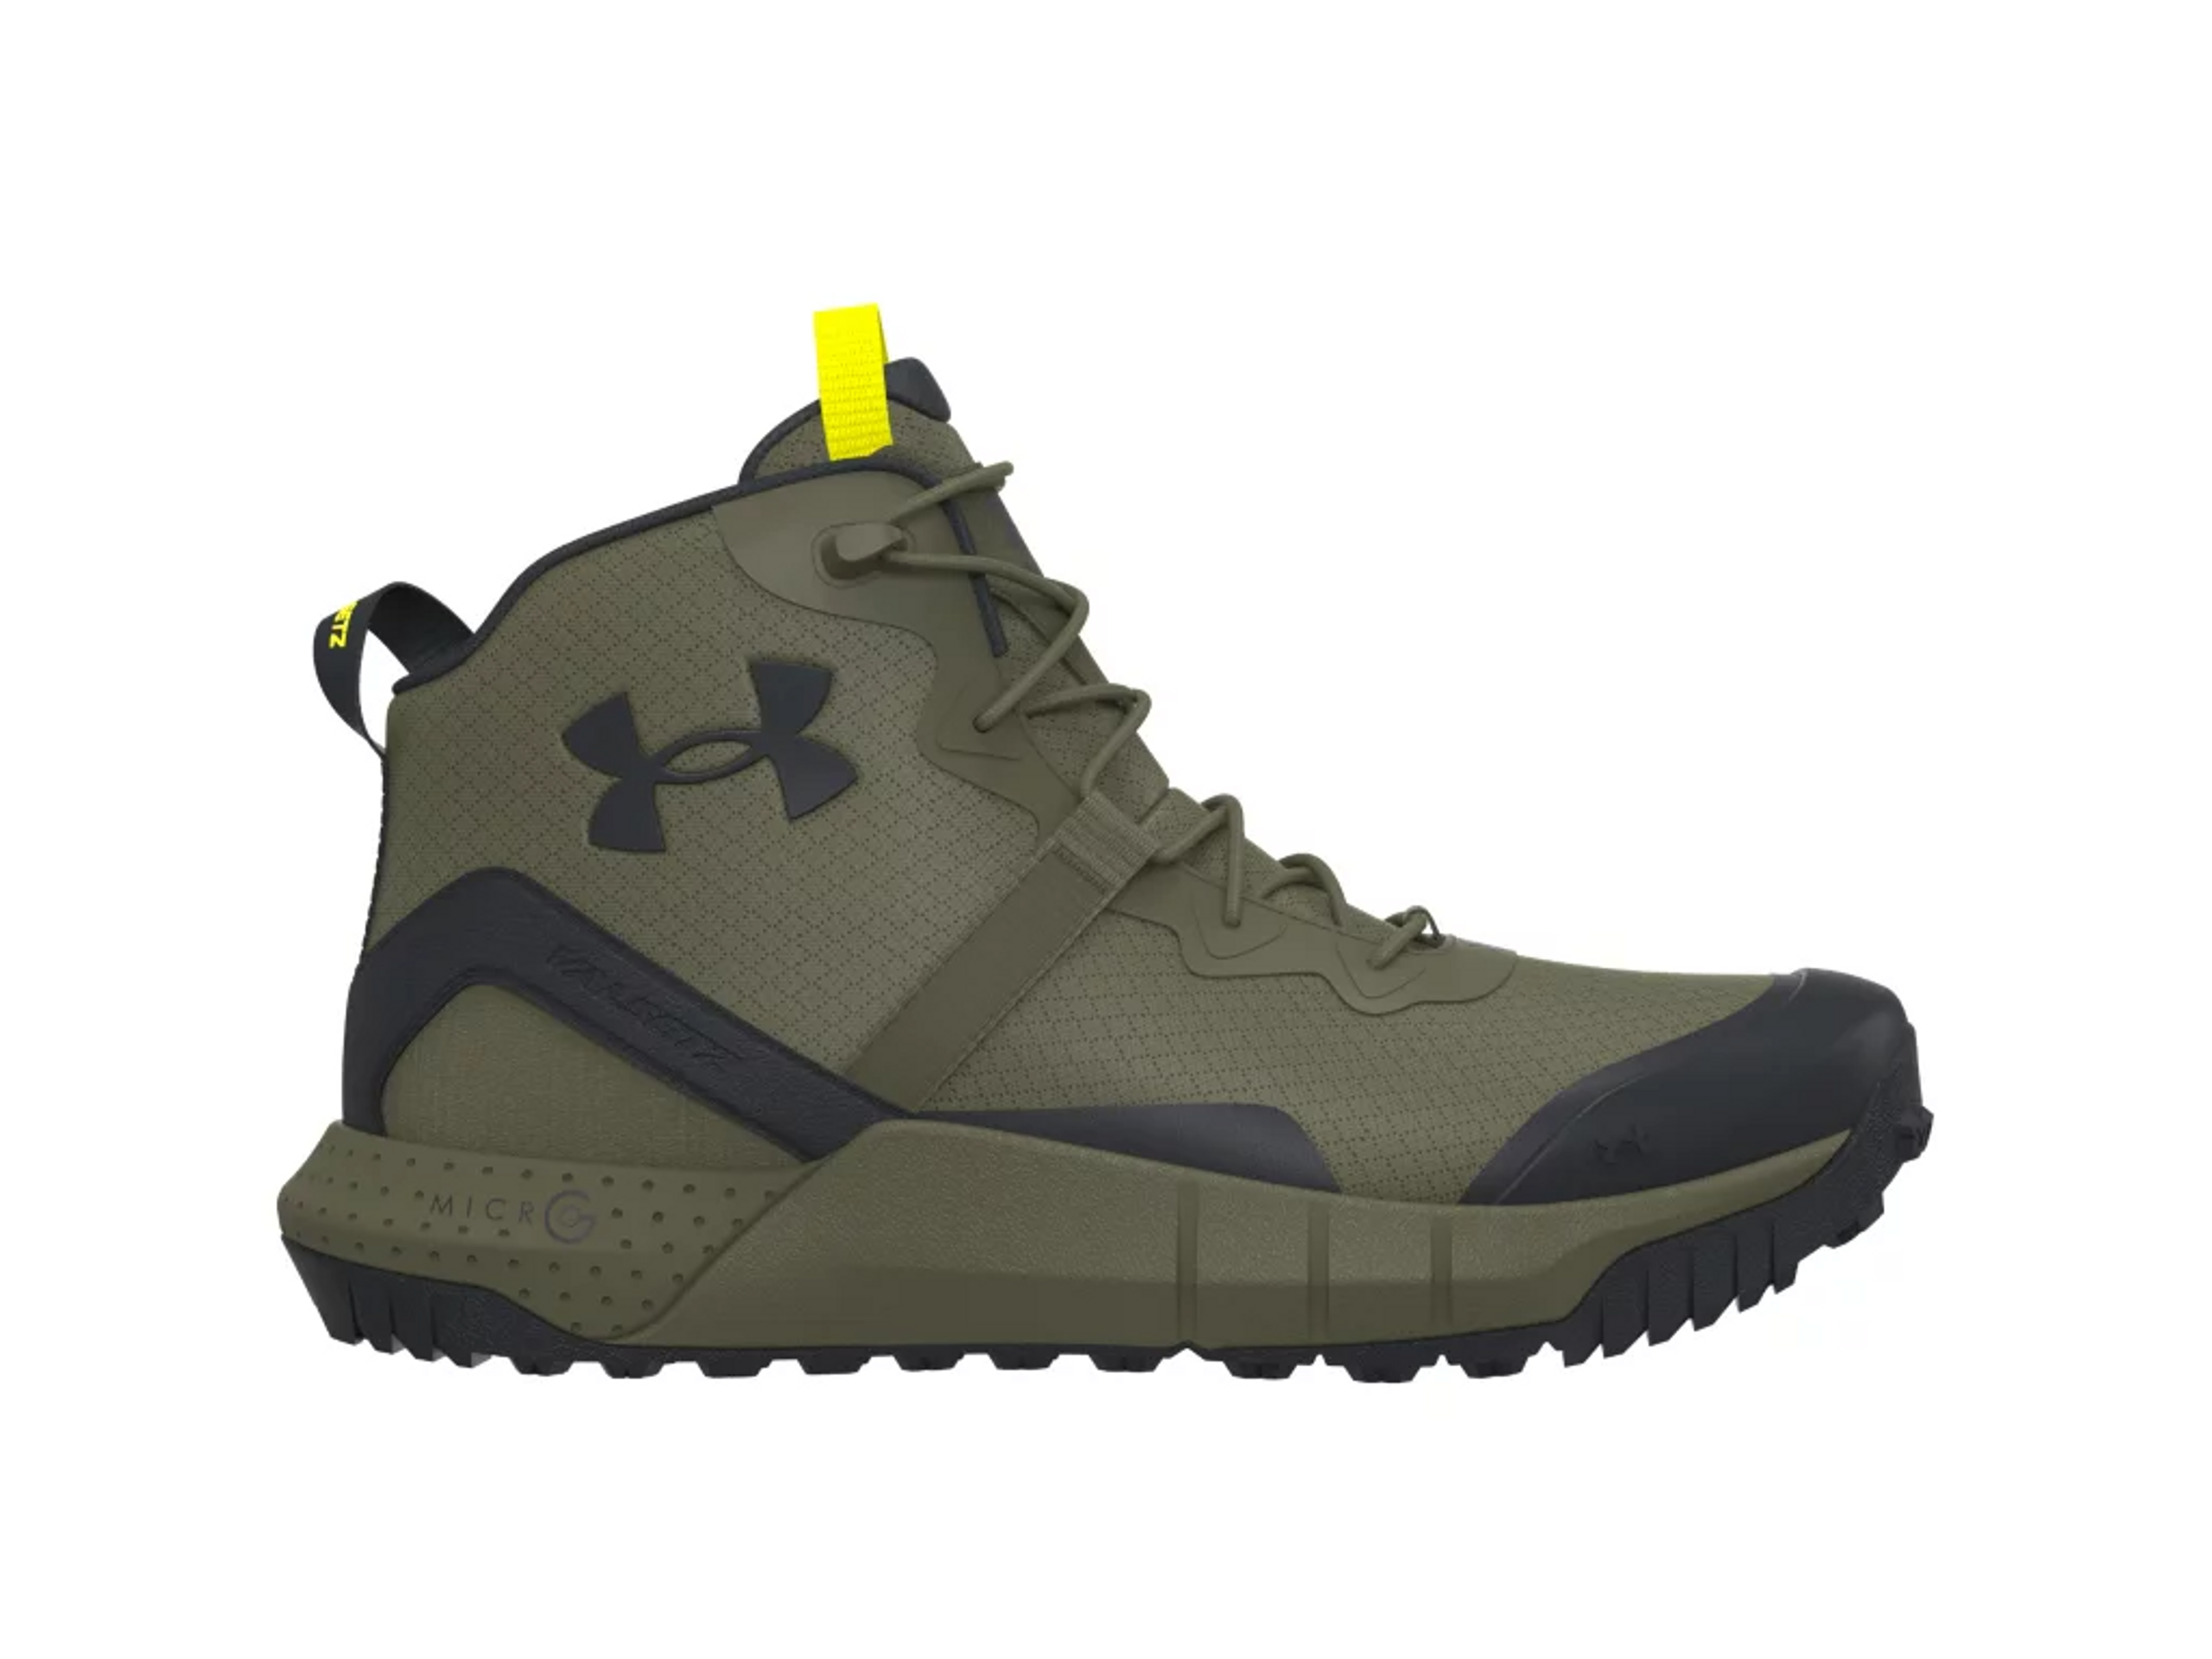 UA Micro G Strikefast Mid Tactical Shoes